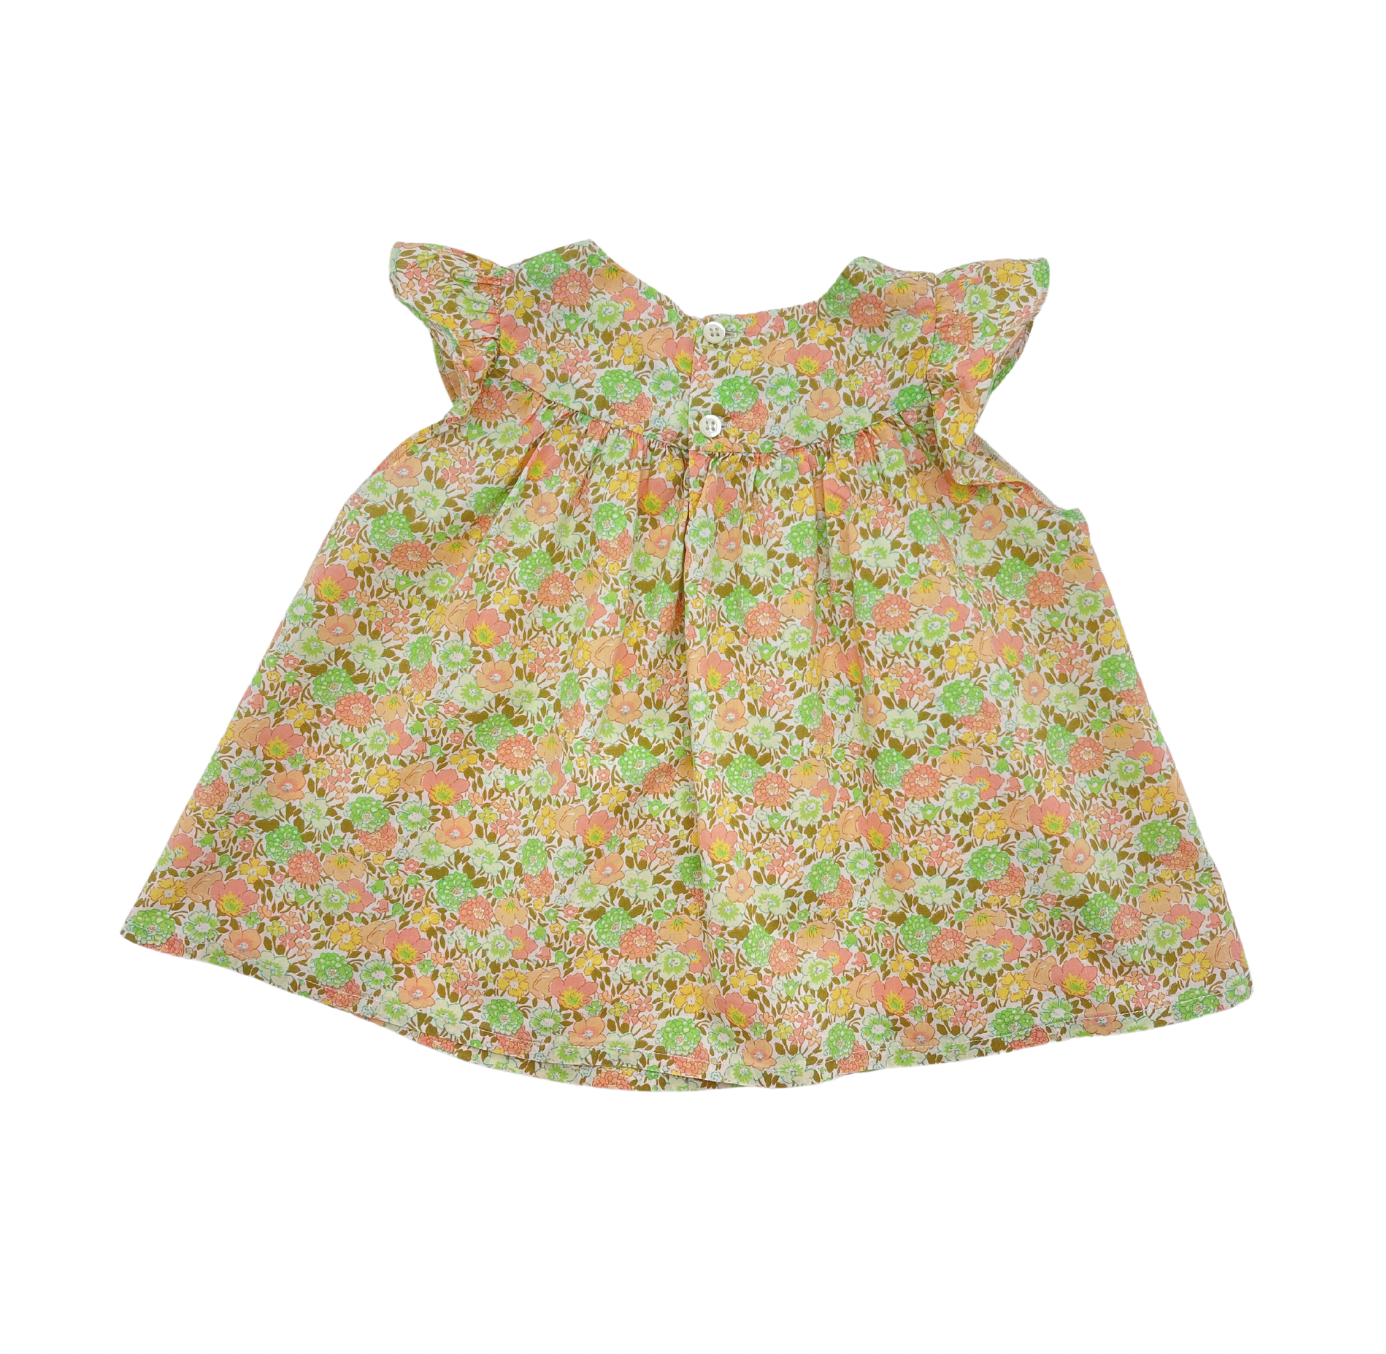 BONPOINT - Liberty floral blouse - 2 years old